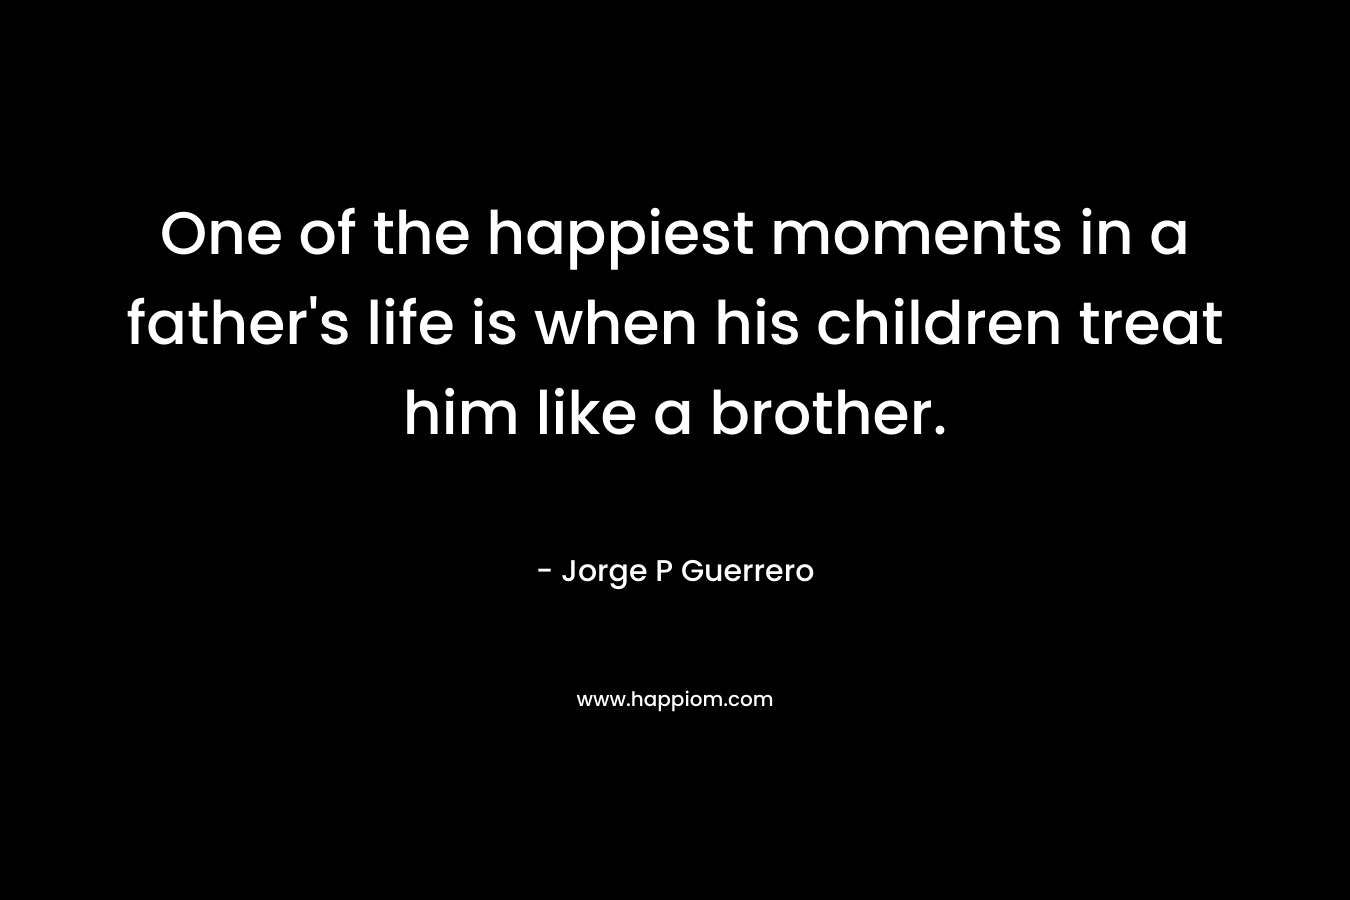 One of the happiest moments in a father's life is when his children treat him like a brother.